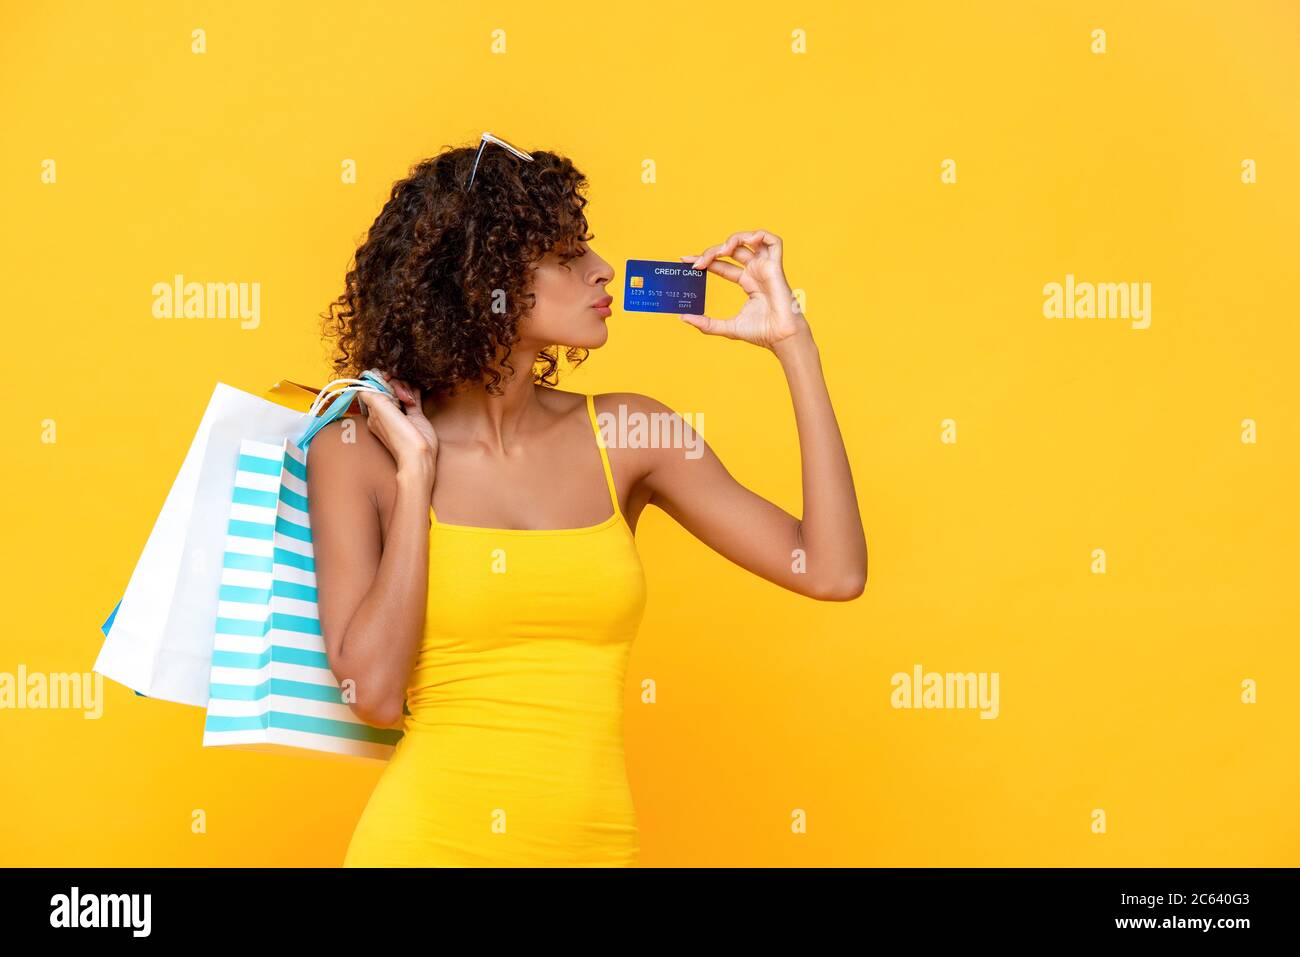 Fashionable curly hair woman carrying shopping bags loves to spend with credit card Stock Photo